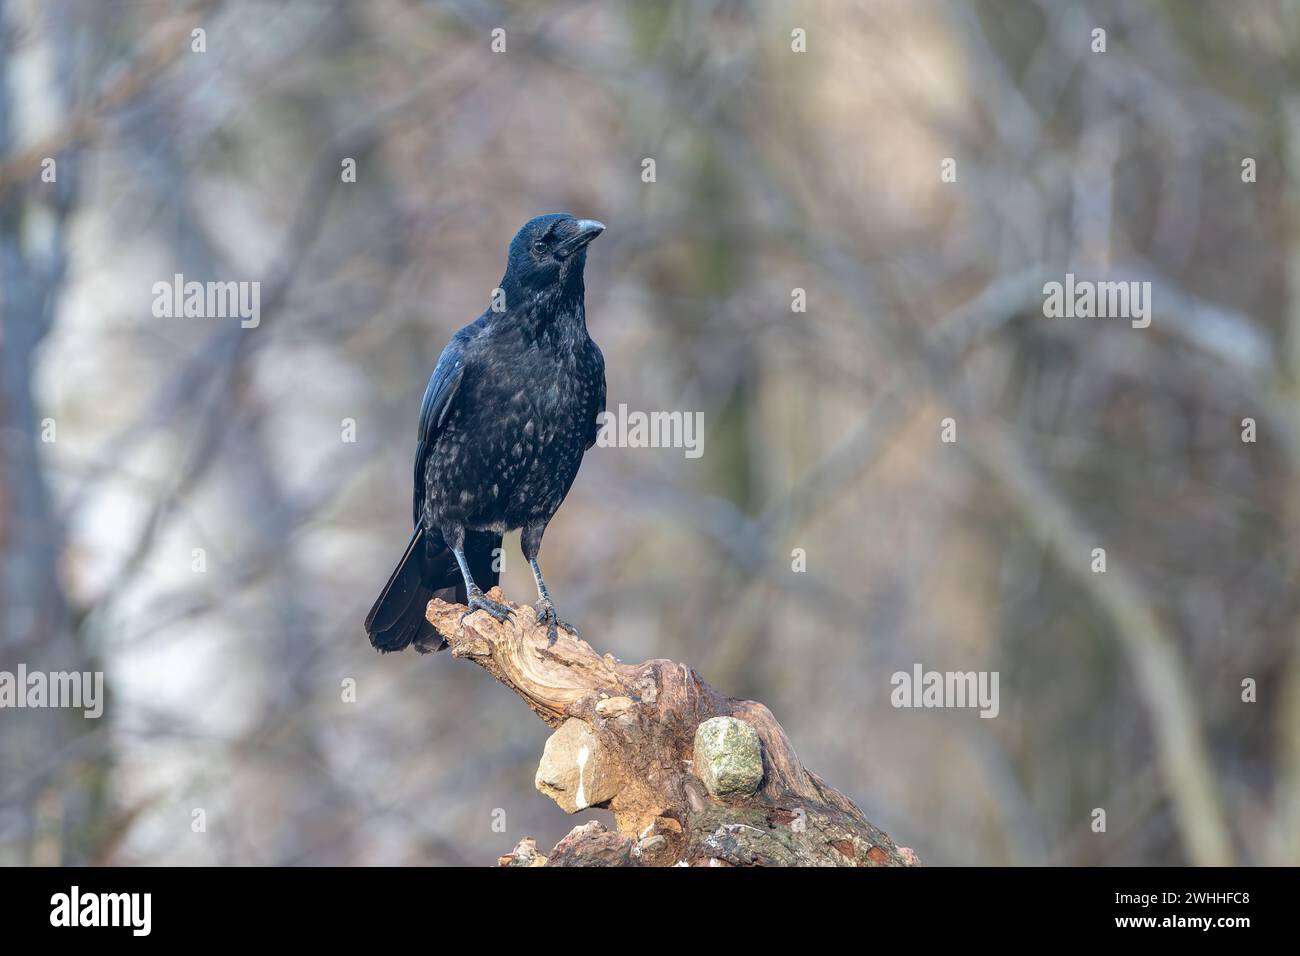 Carrion crow, (Corvus corone), perched on a tree stump, Insch, Aberdeenshire, Scotland, UK Stock Photo